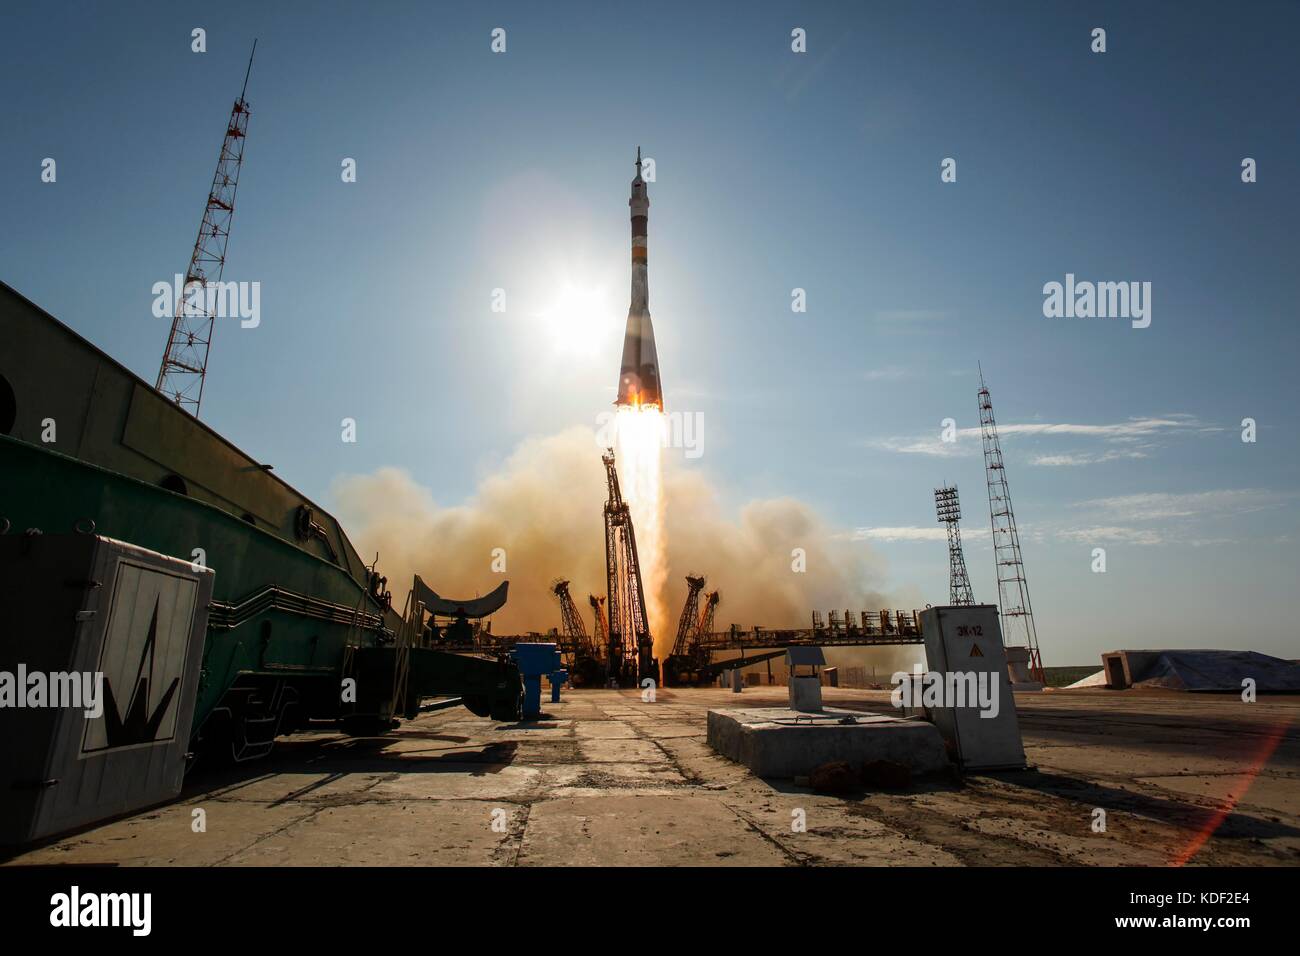 The Soyuz TMA-06M spacecraft launches from the Baikonur Cosmodrome to begin the Expedition 33/34 mission to the NASA International Space Station October 23, 2012 in Baikonur, Kazakhstan.   (photo by Bill Ingalls via Planetpix) Stock Photo